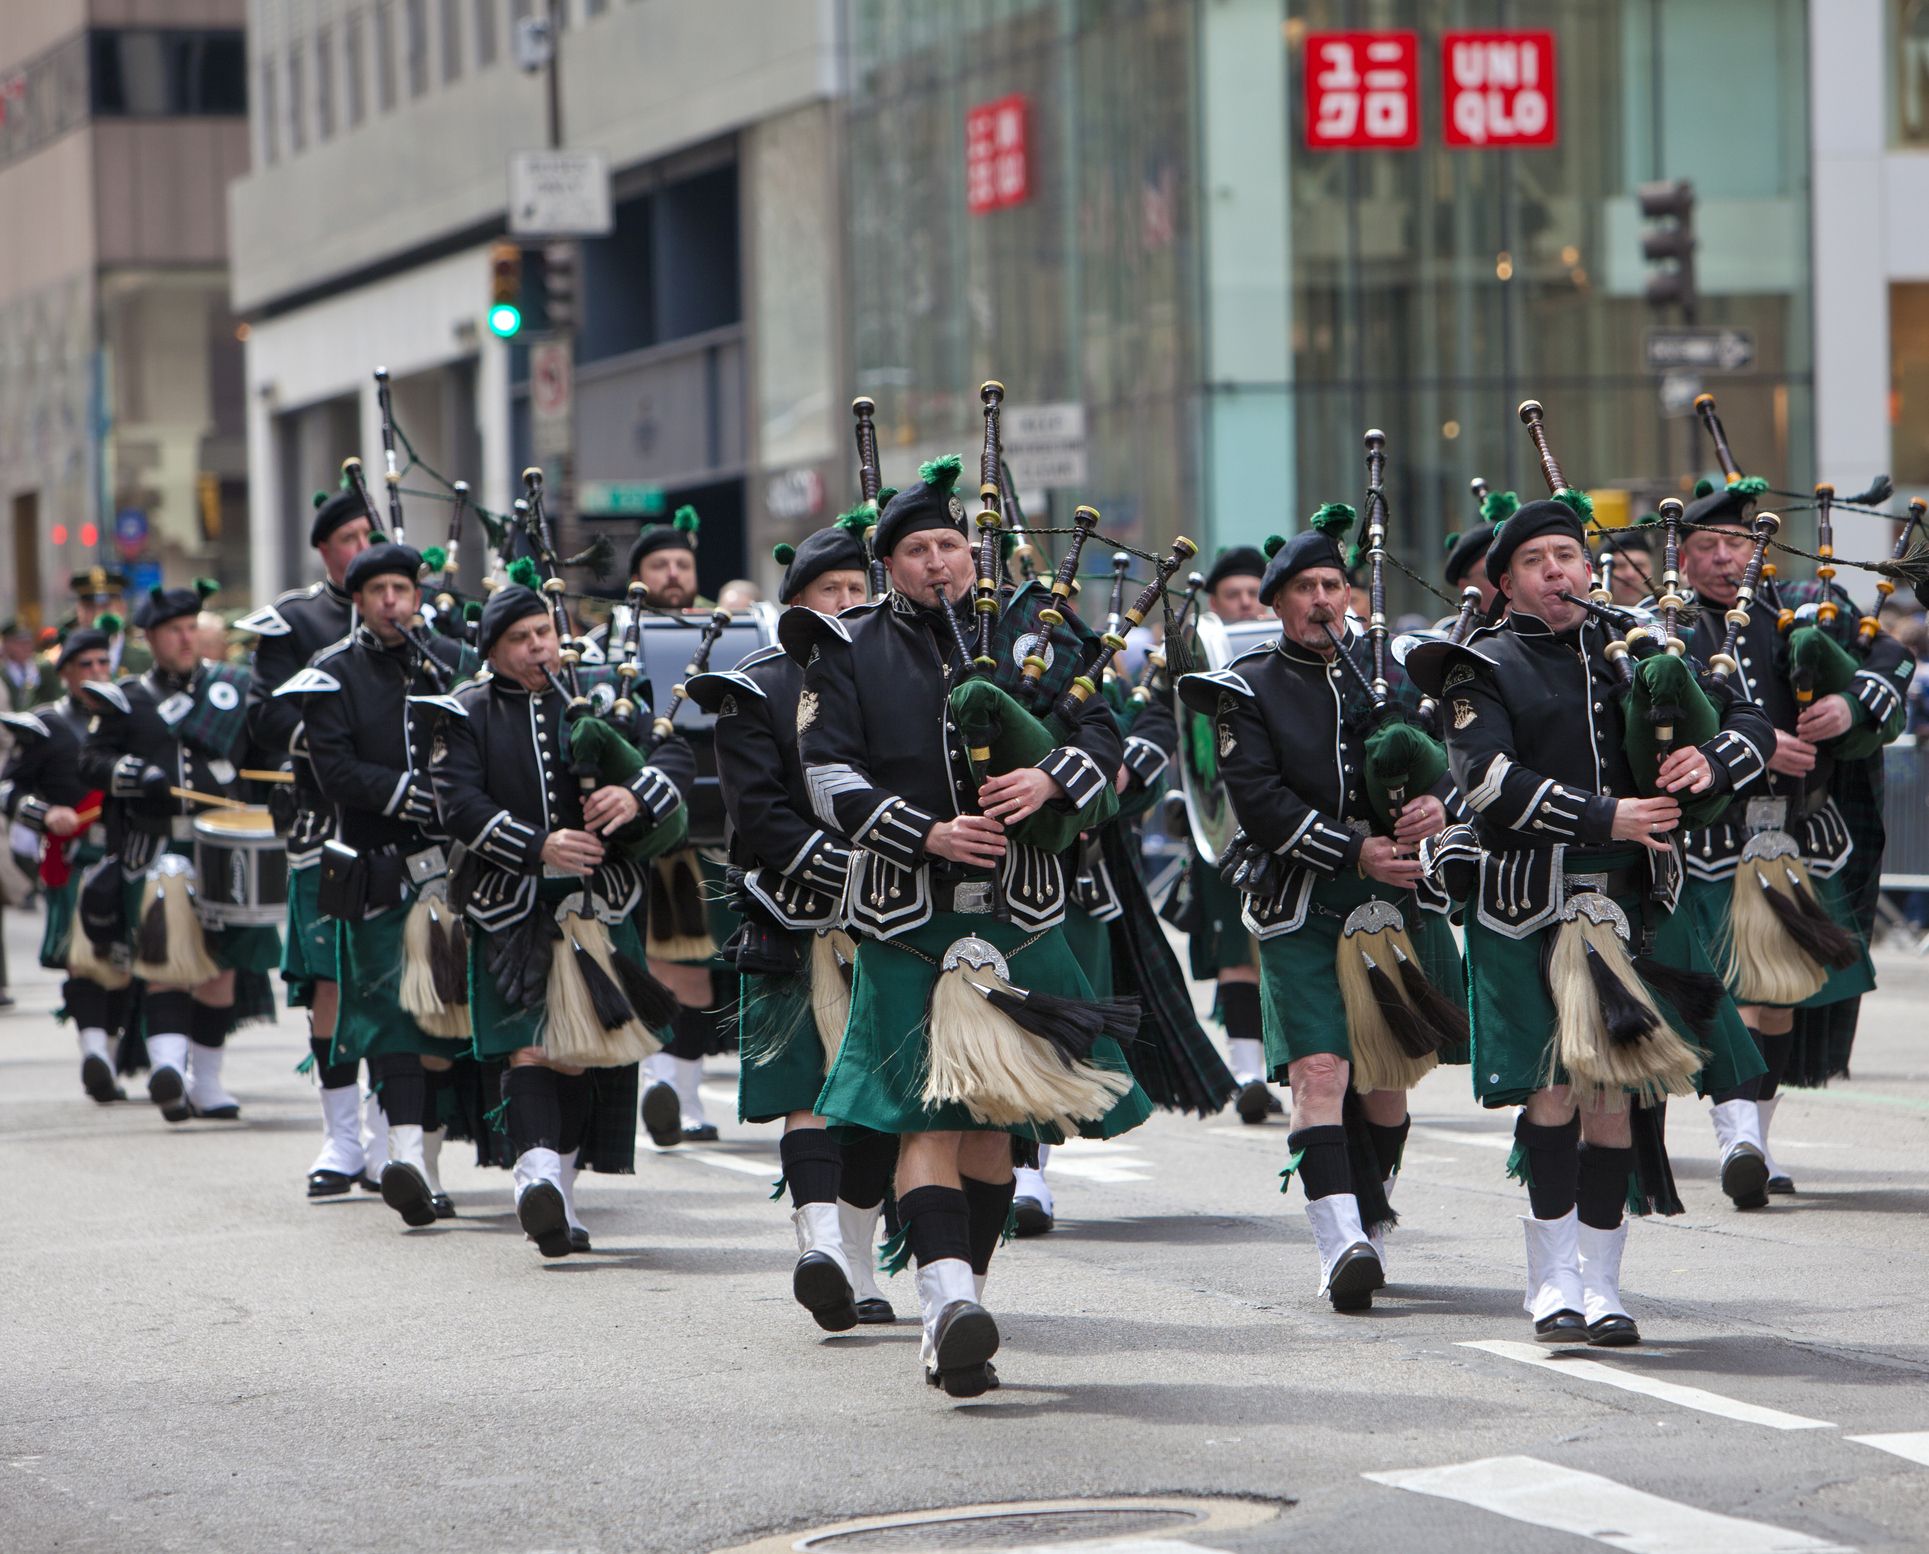 St. Patrick's Day in NYC 2021 - Best NYC Irish Bars, Parades & Things to Do